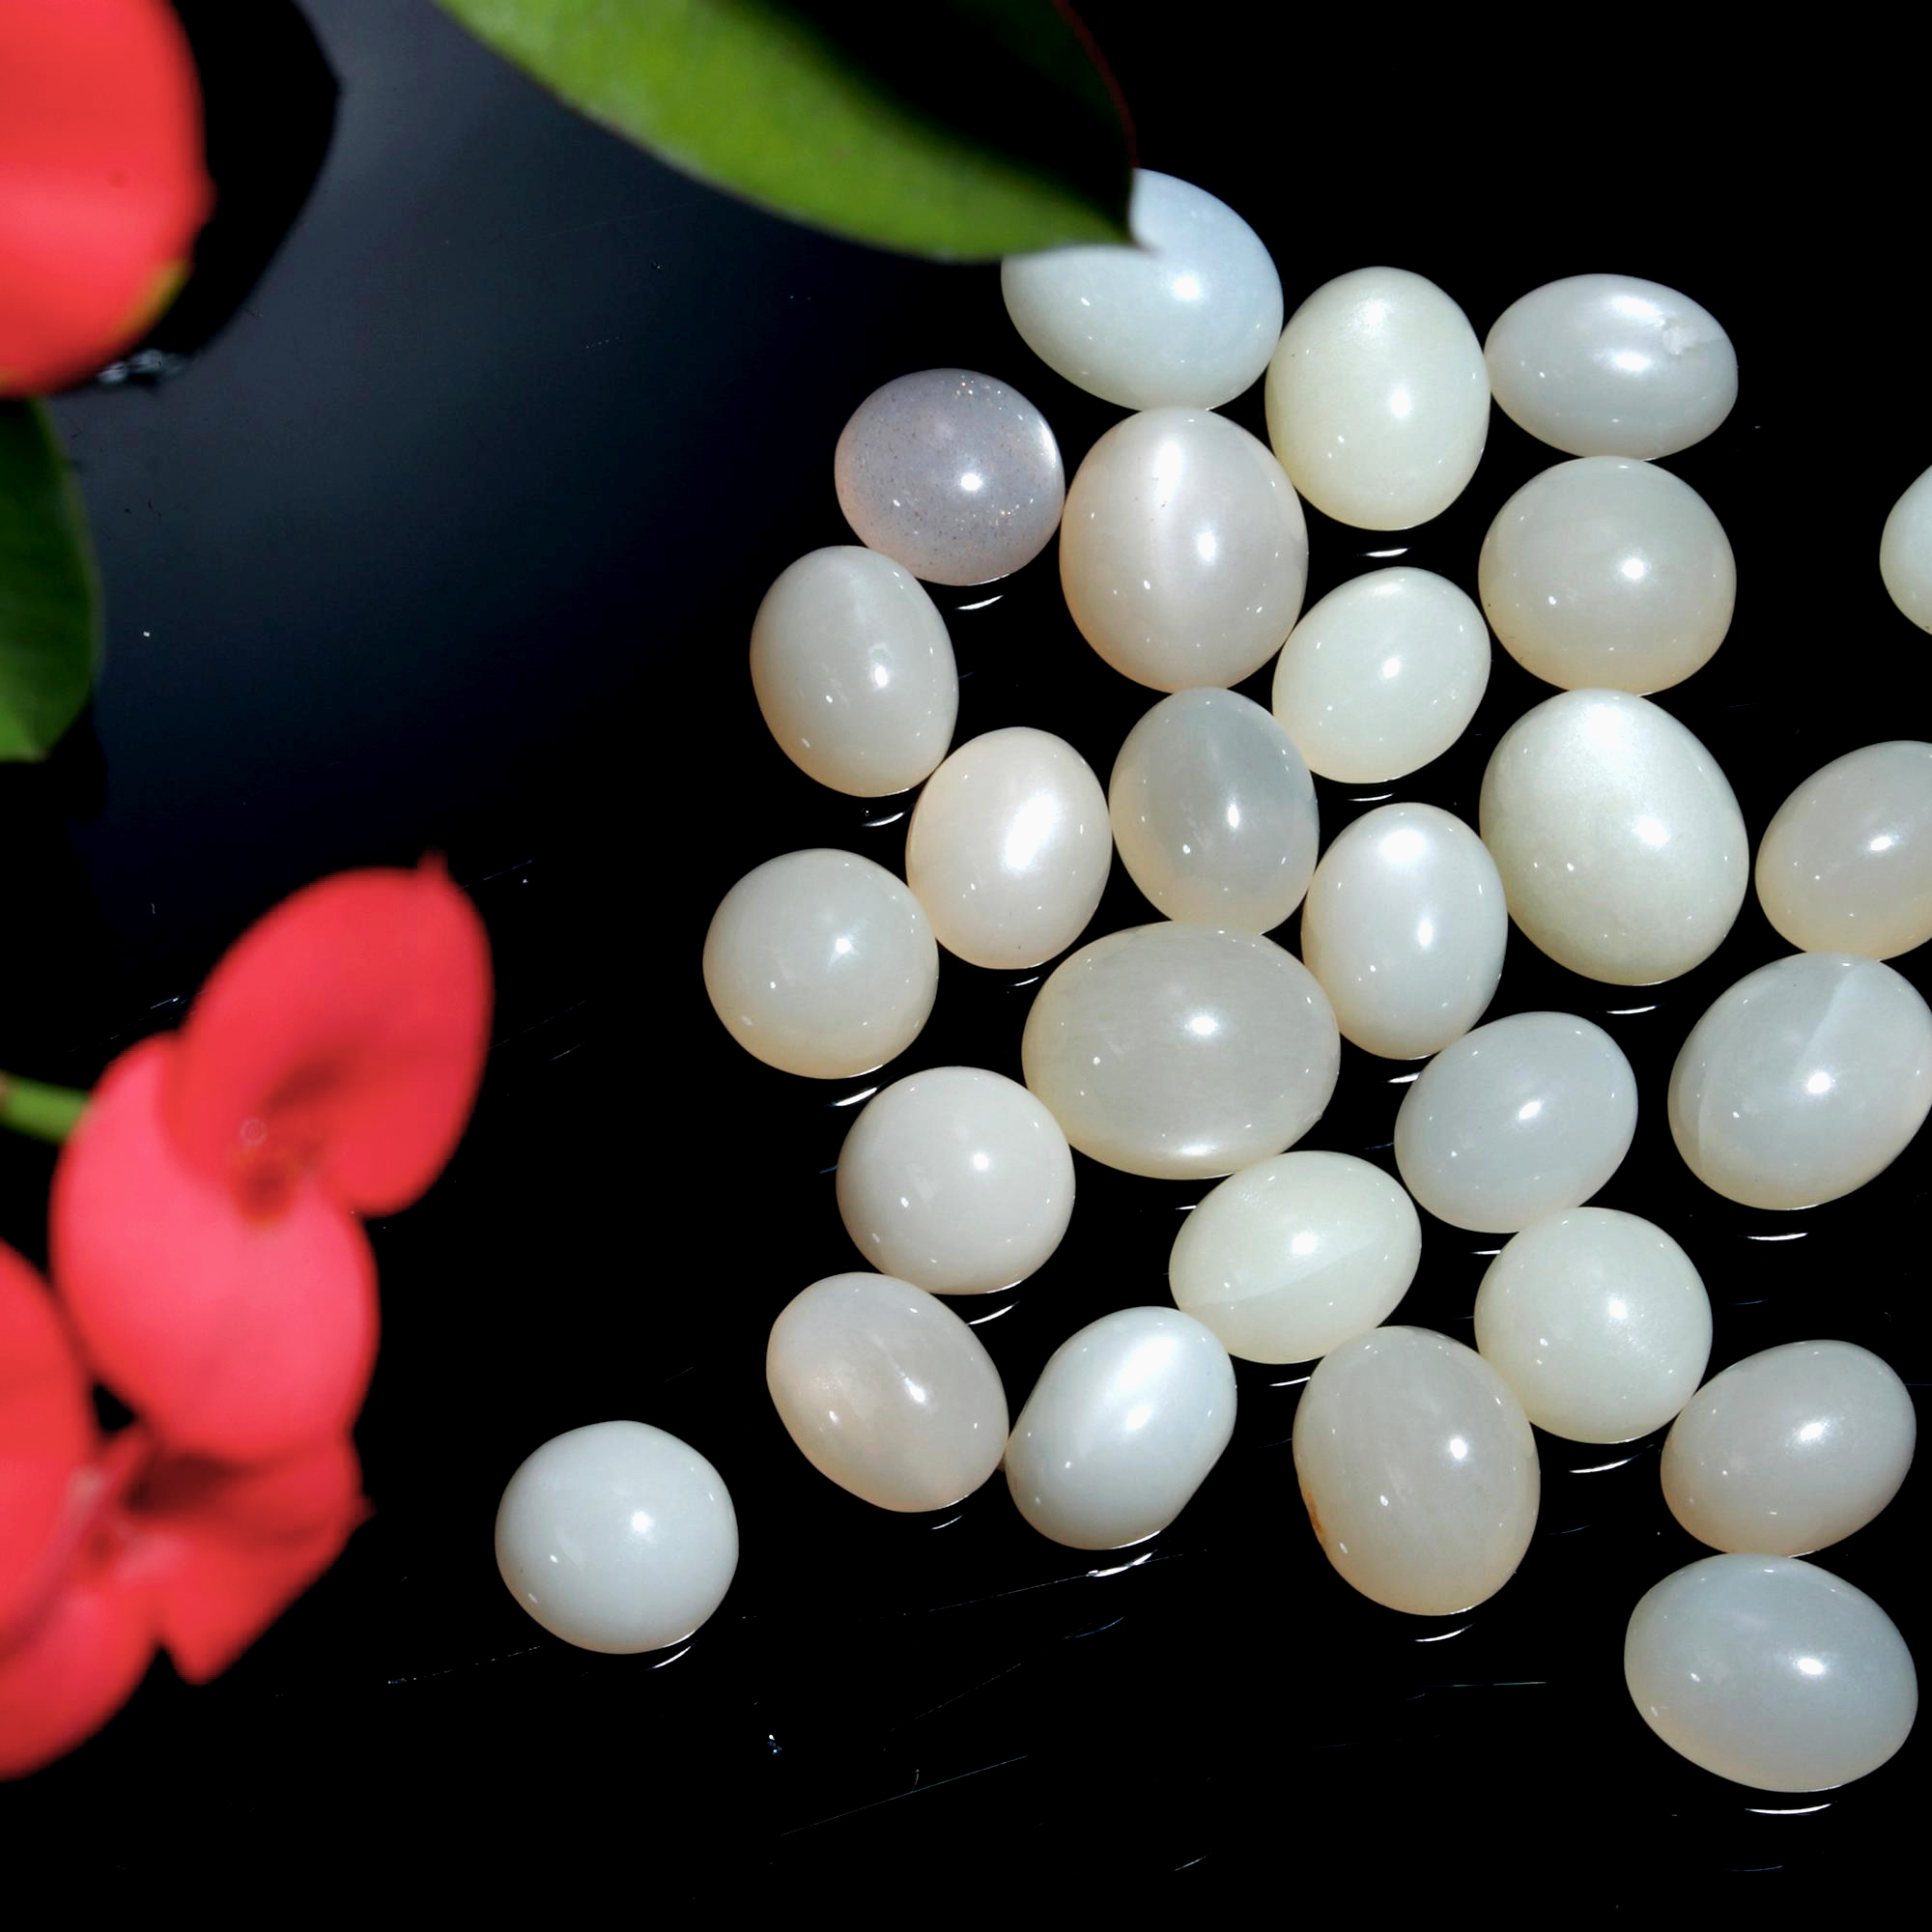 29 Pcs. 66Cts. Natural White Rainbow Moonstone polished Mix Cabochon Wholesale Loose Lot Size 11x9 8x8mm Gemstone for jewelry